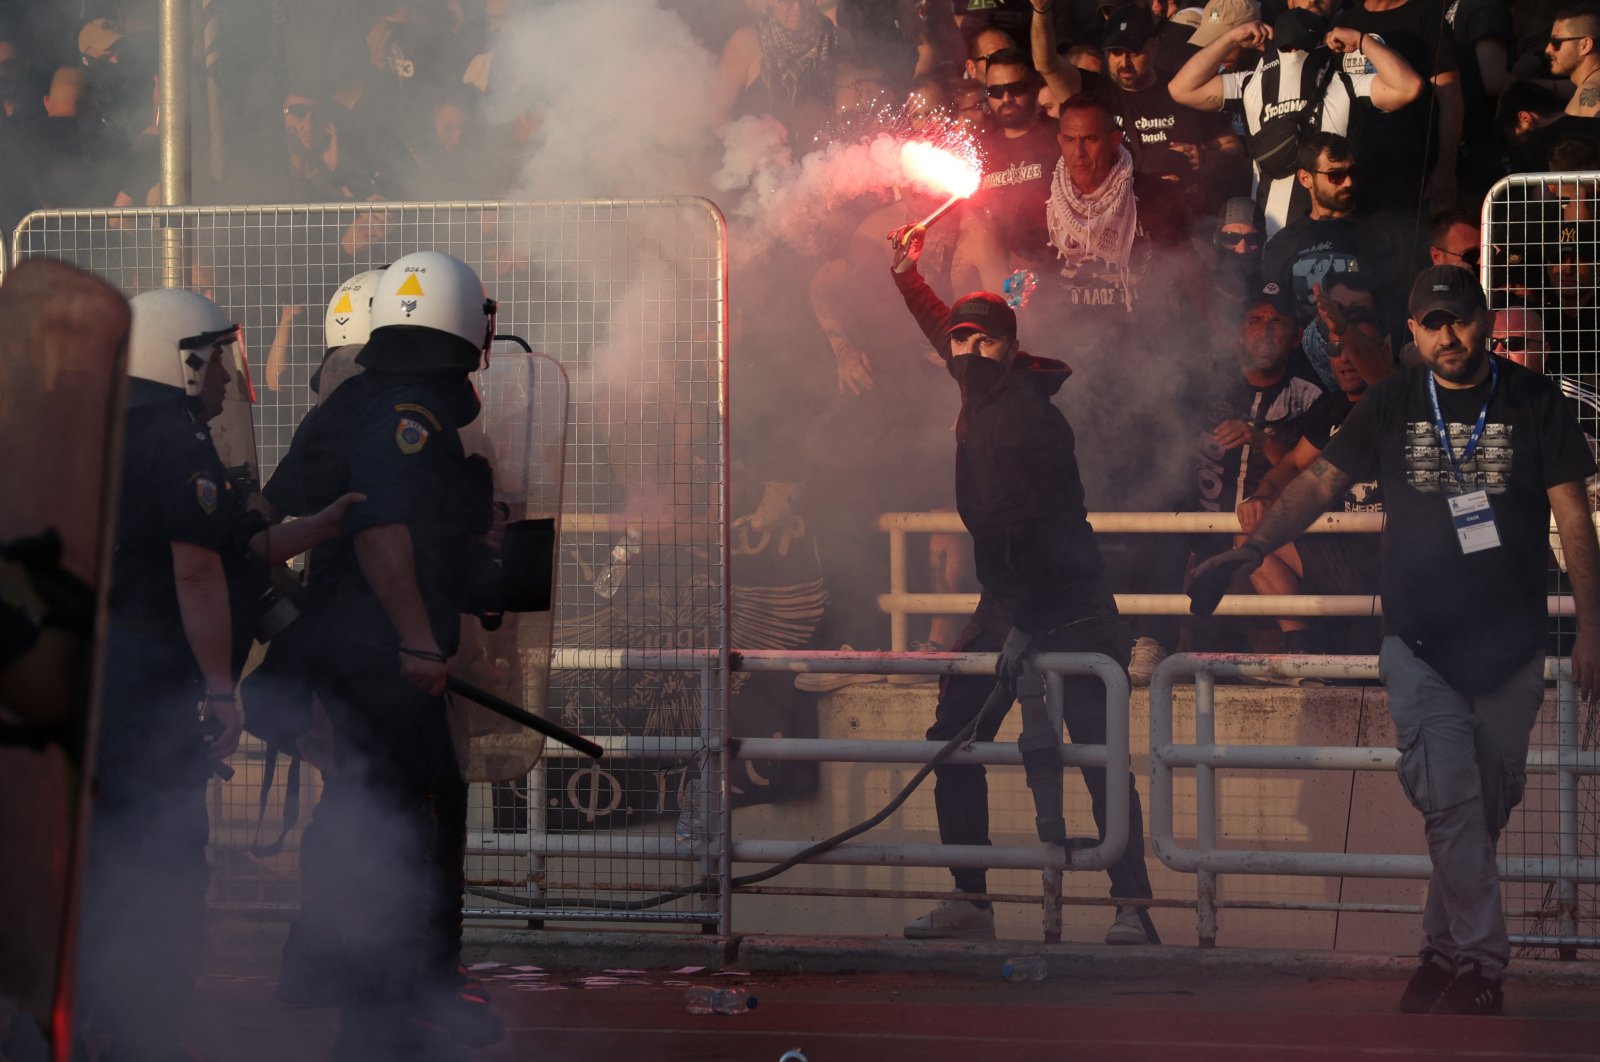 Police and fans clash before the Greek Cup final between Panathinaikos and PAOK, Athens, Greece, May 21, 2022. (Reuters Photo)